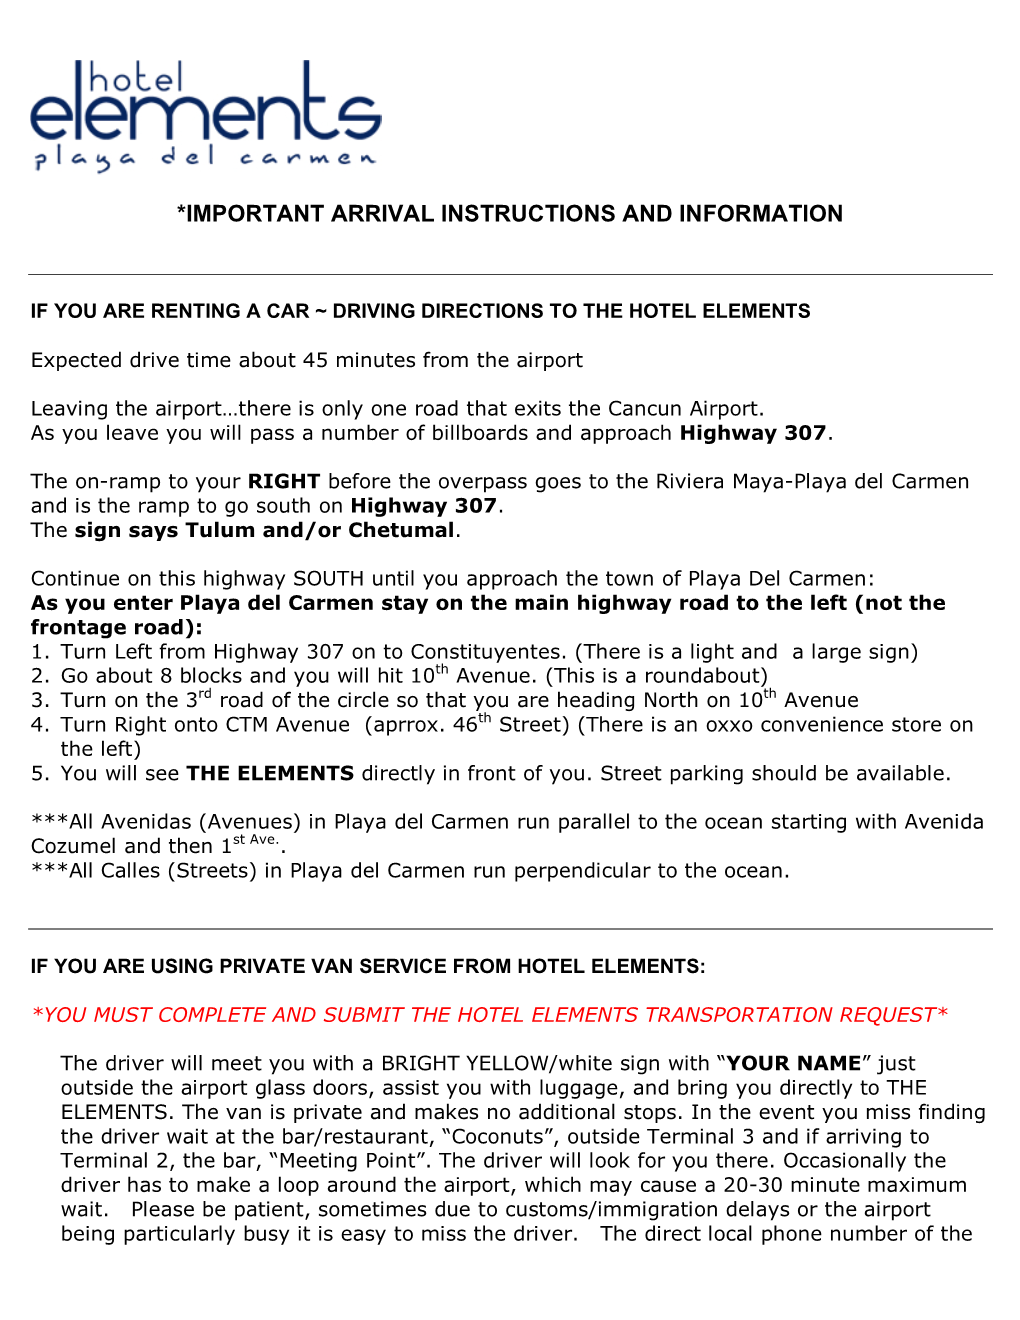 Arrival Instructions and Information